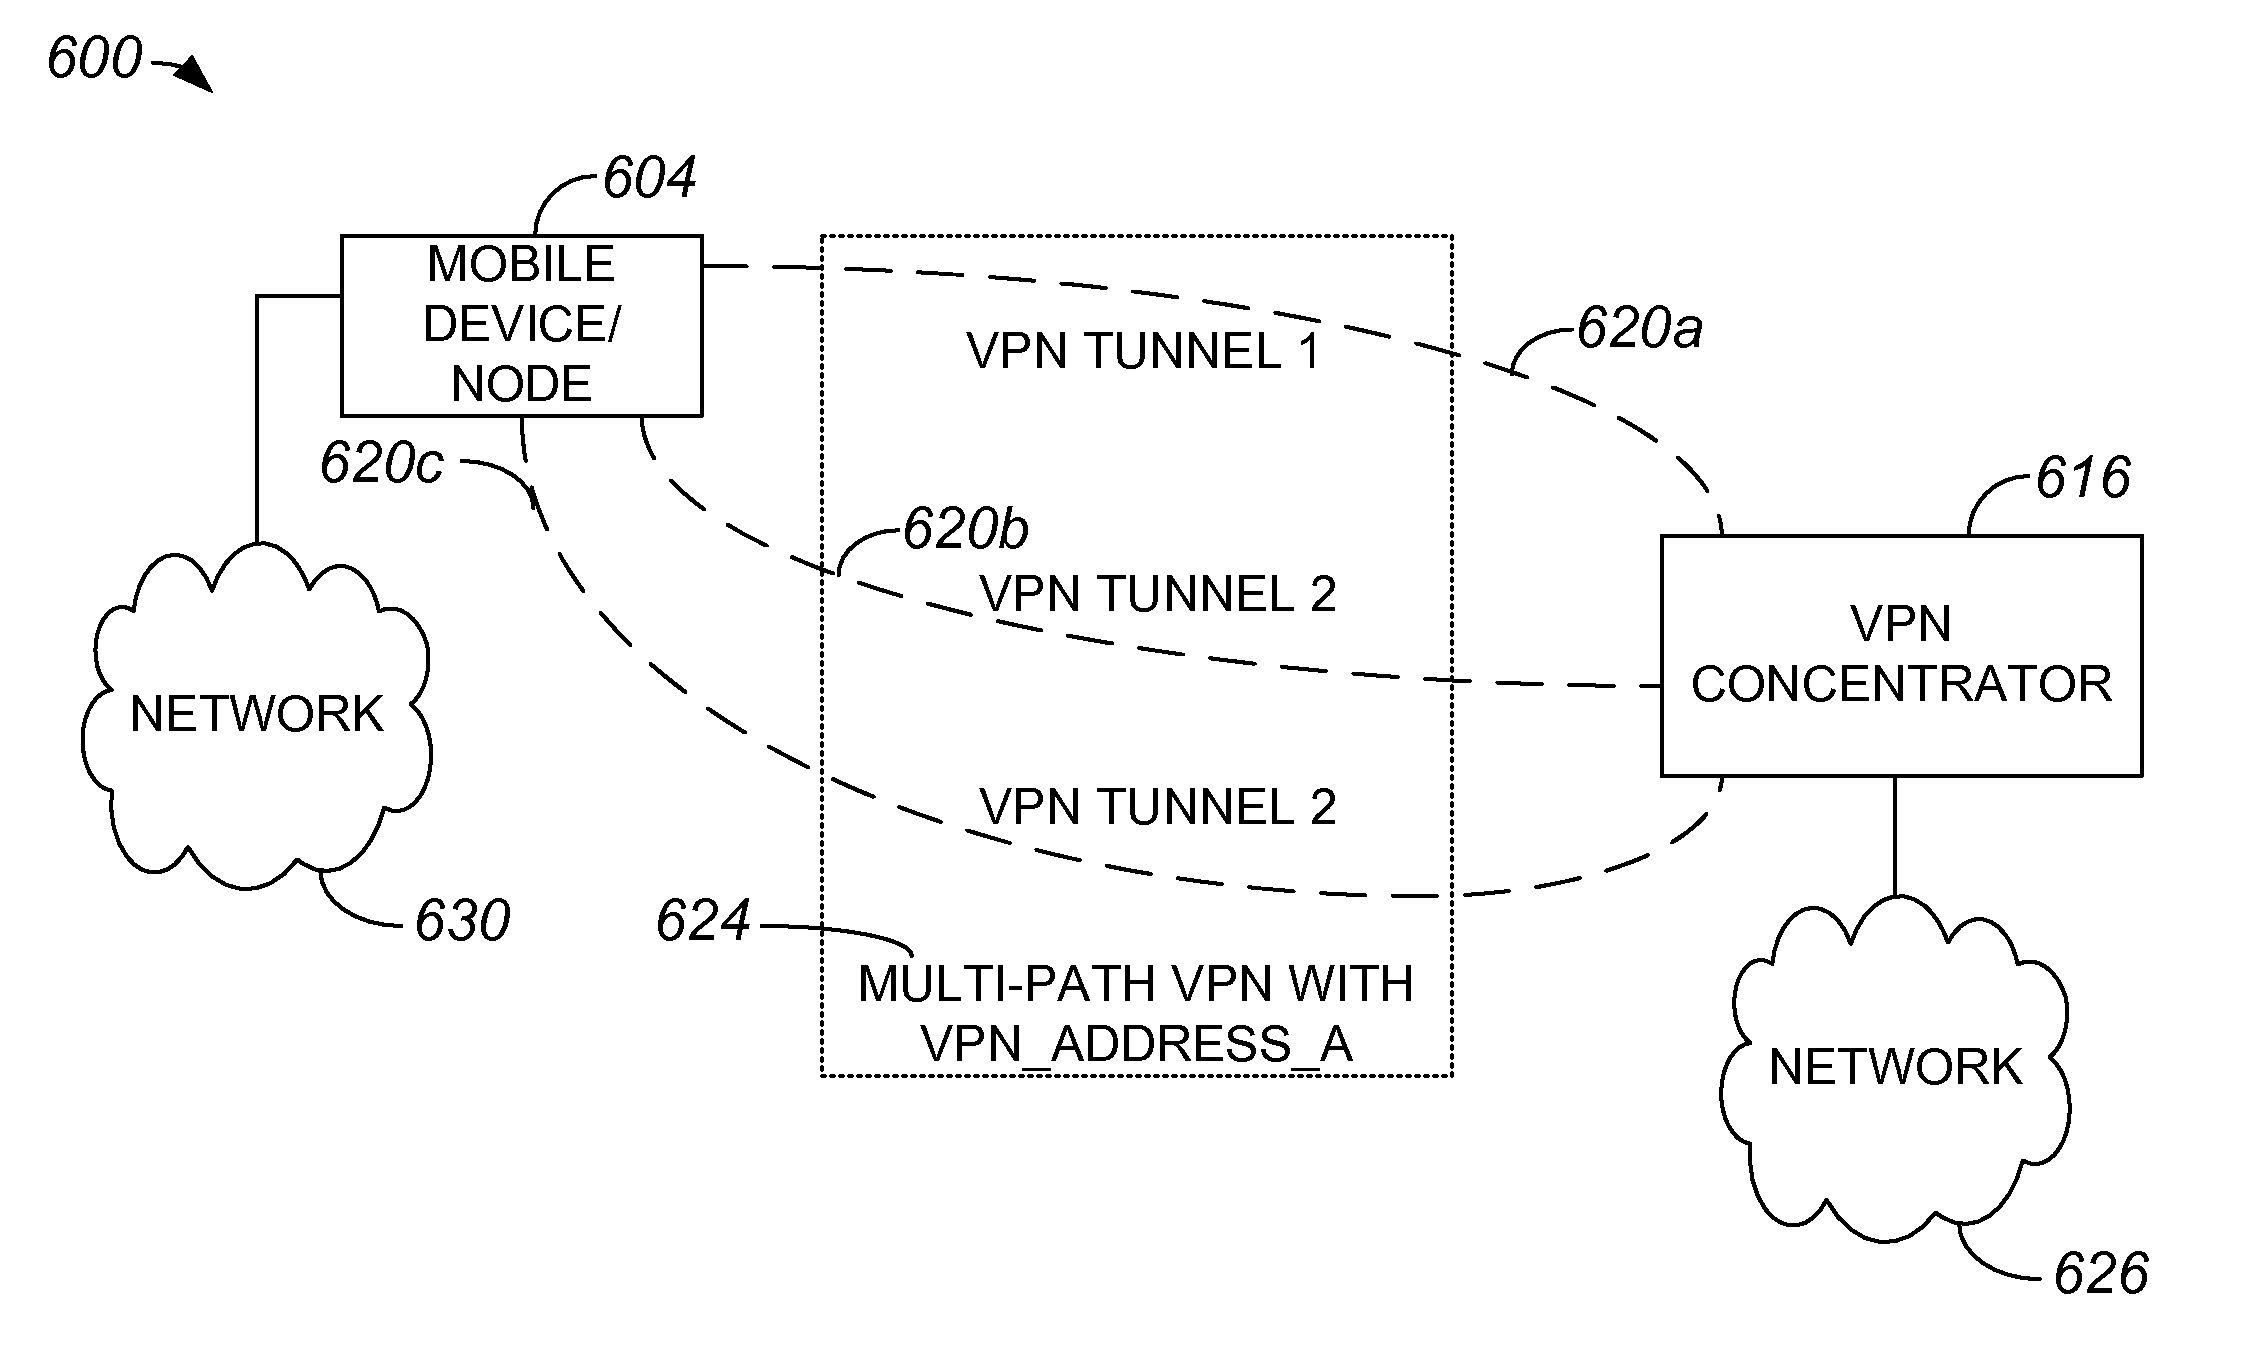 Network mobility over a multi-path virtual private network